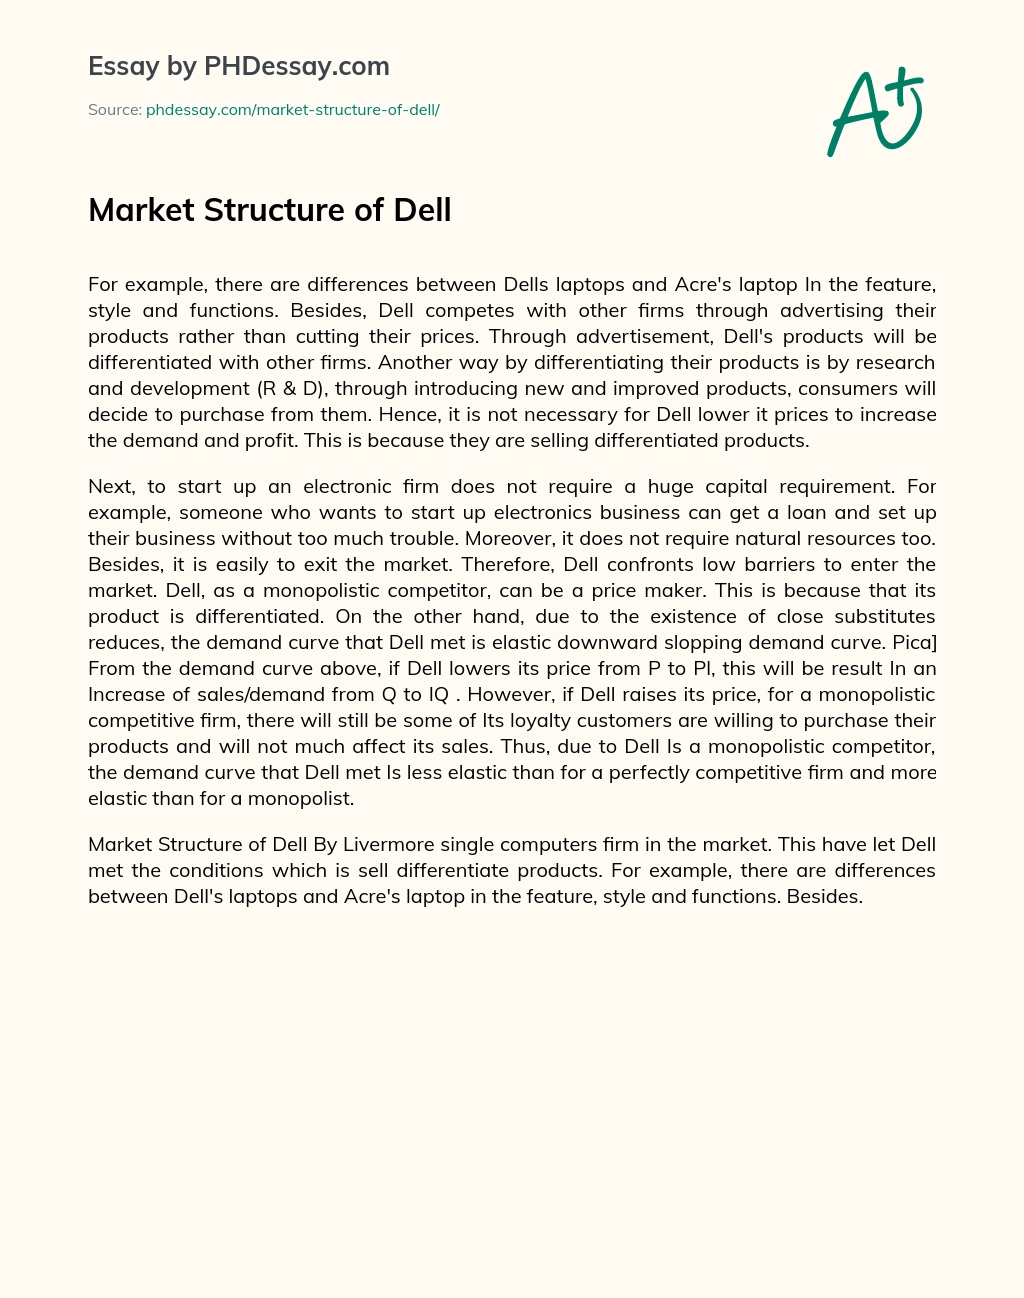 Market Structure of Dell essay